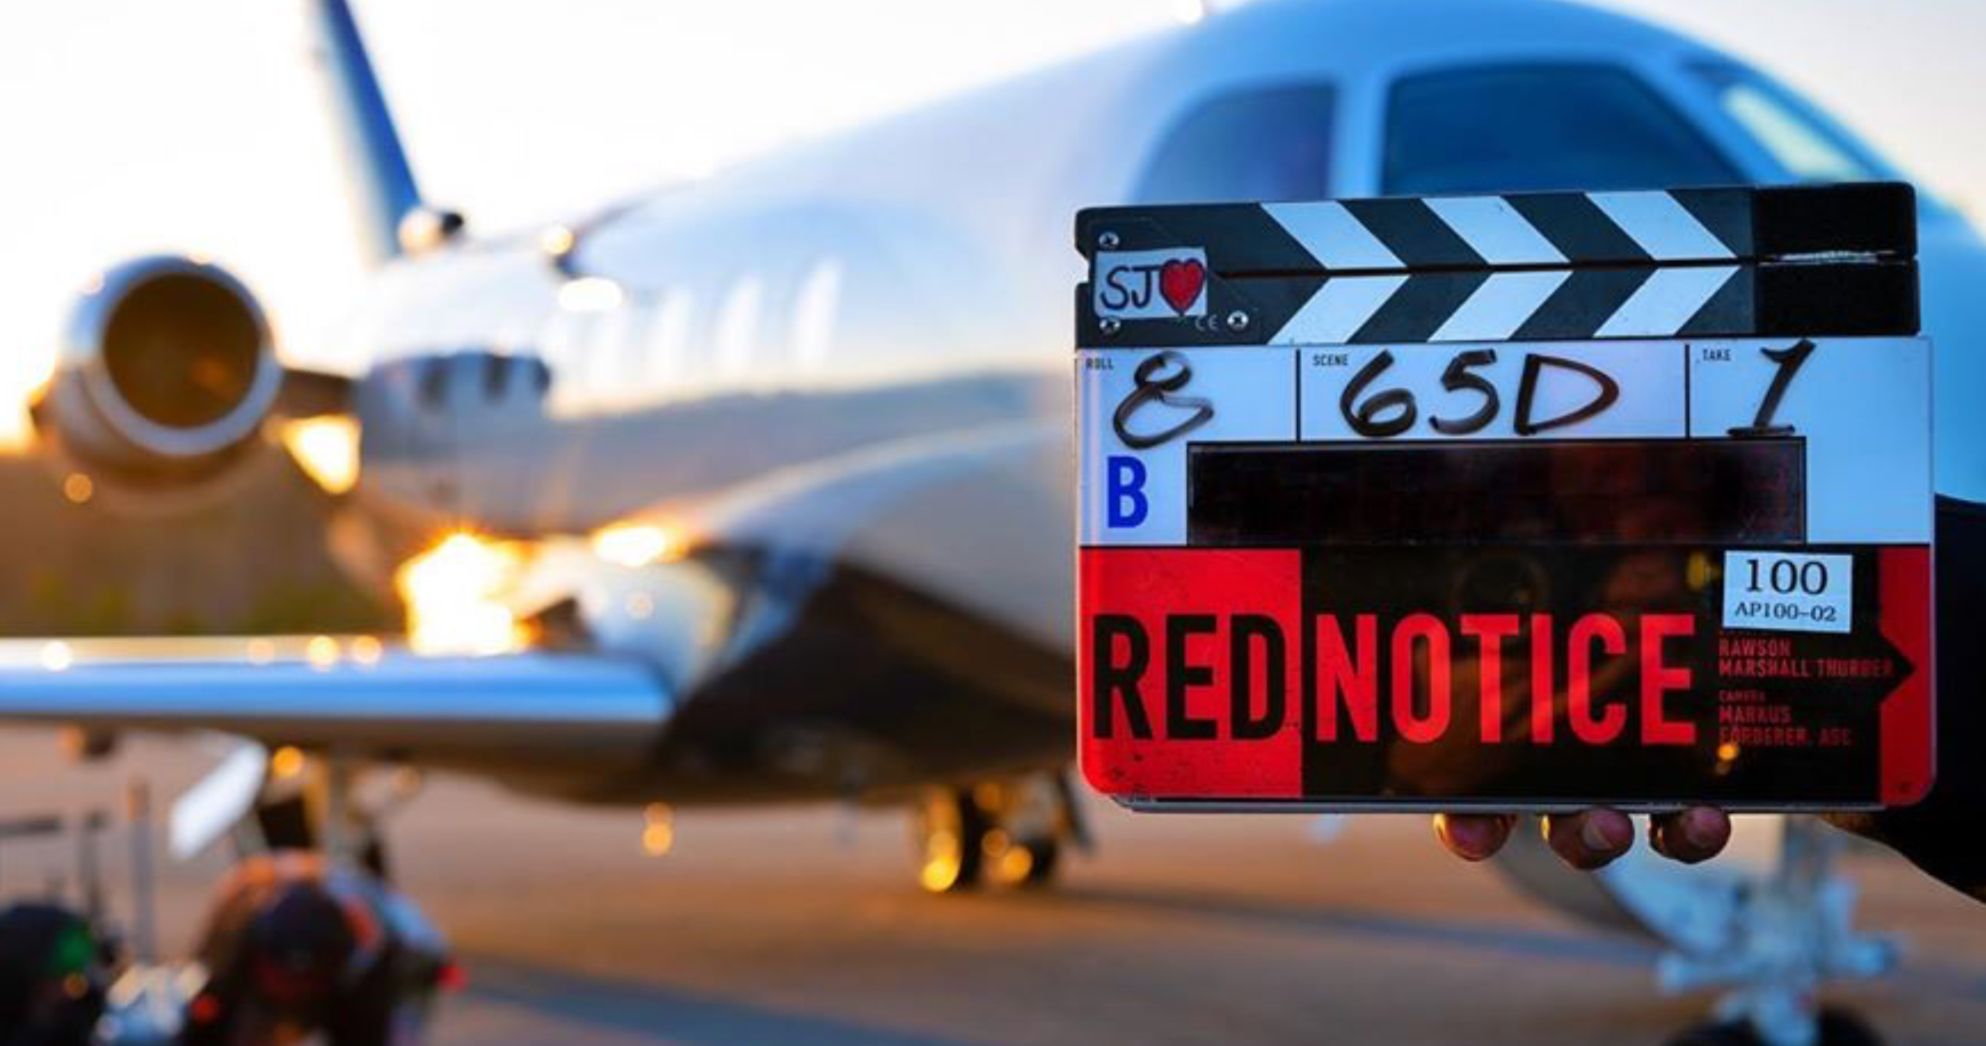 The Rock's Red Notice Begins Shooting for Netflix with Ryan Reynolds and Gal Gadot